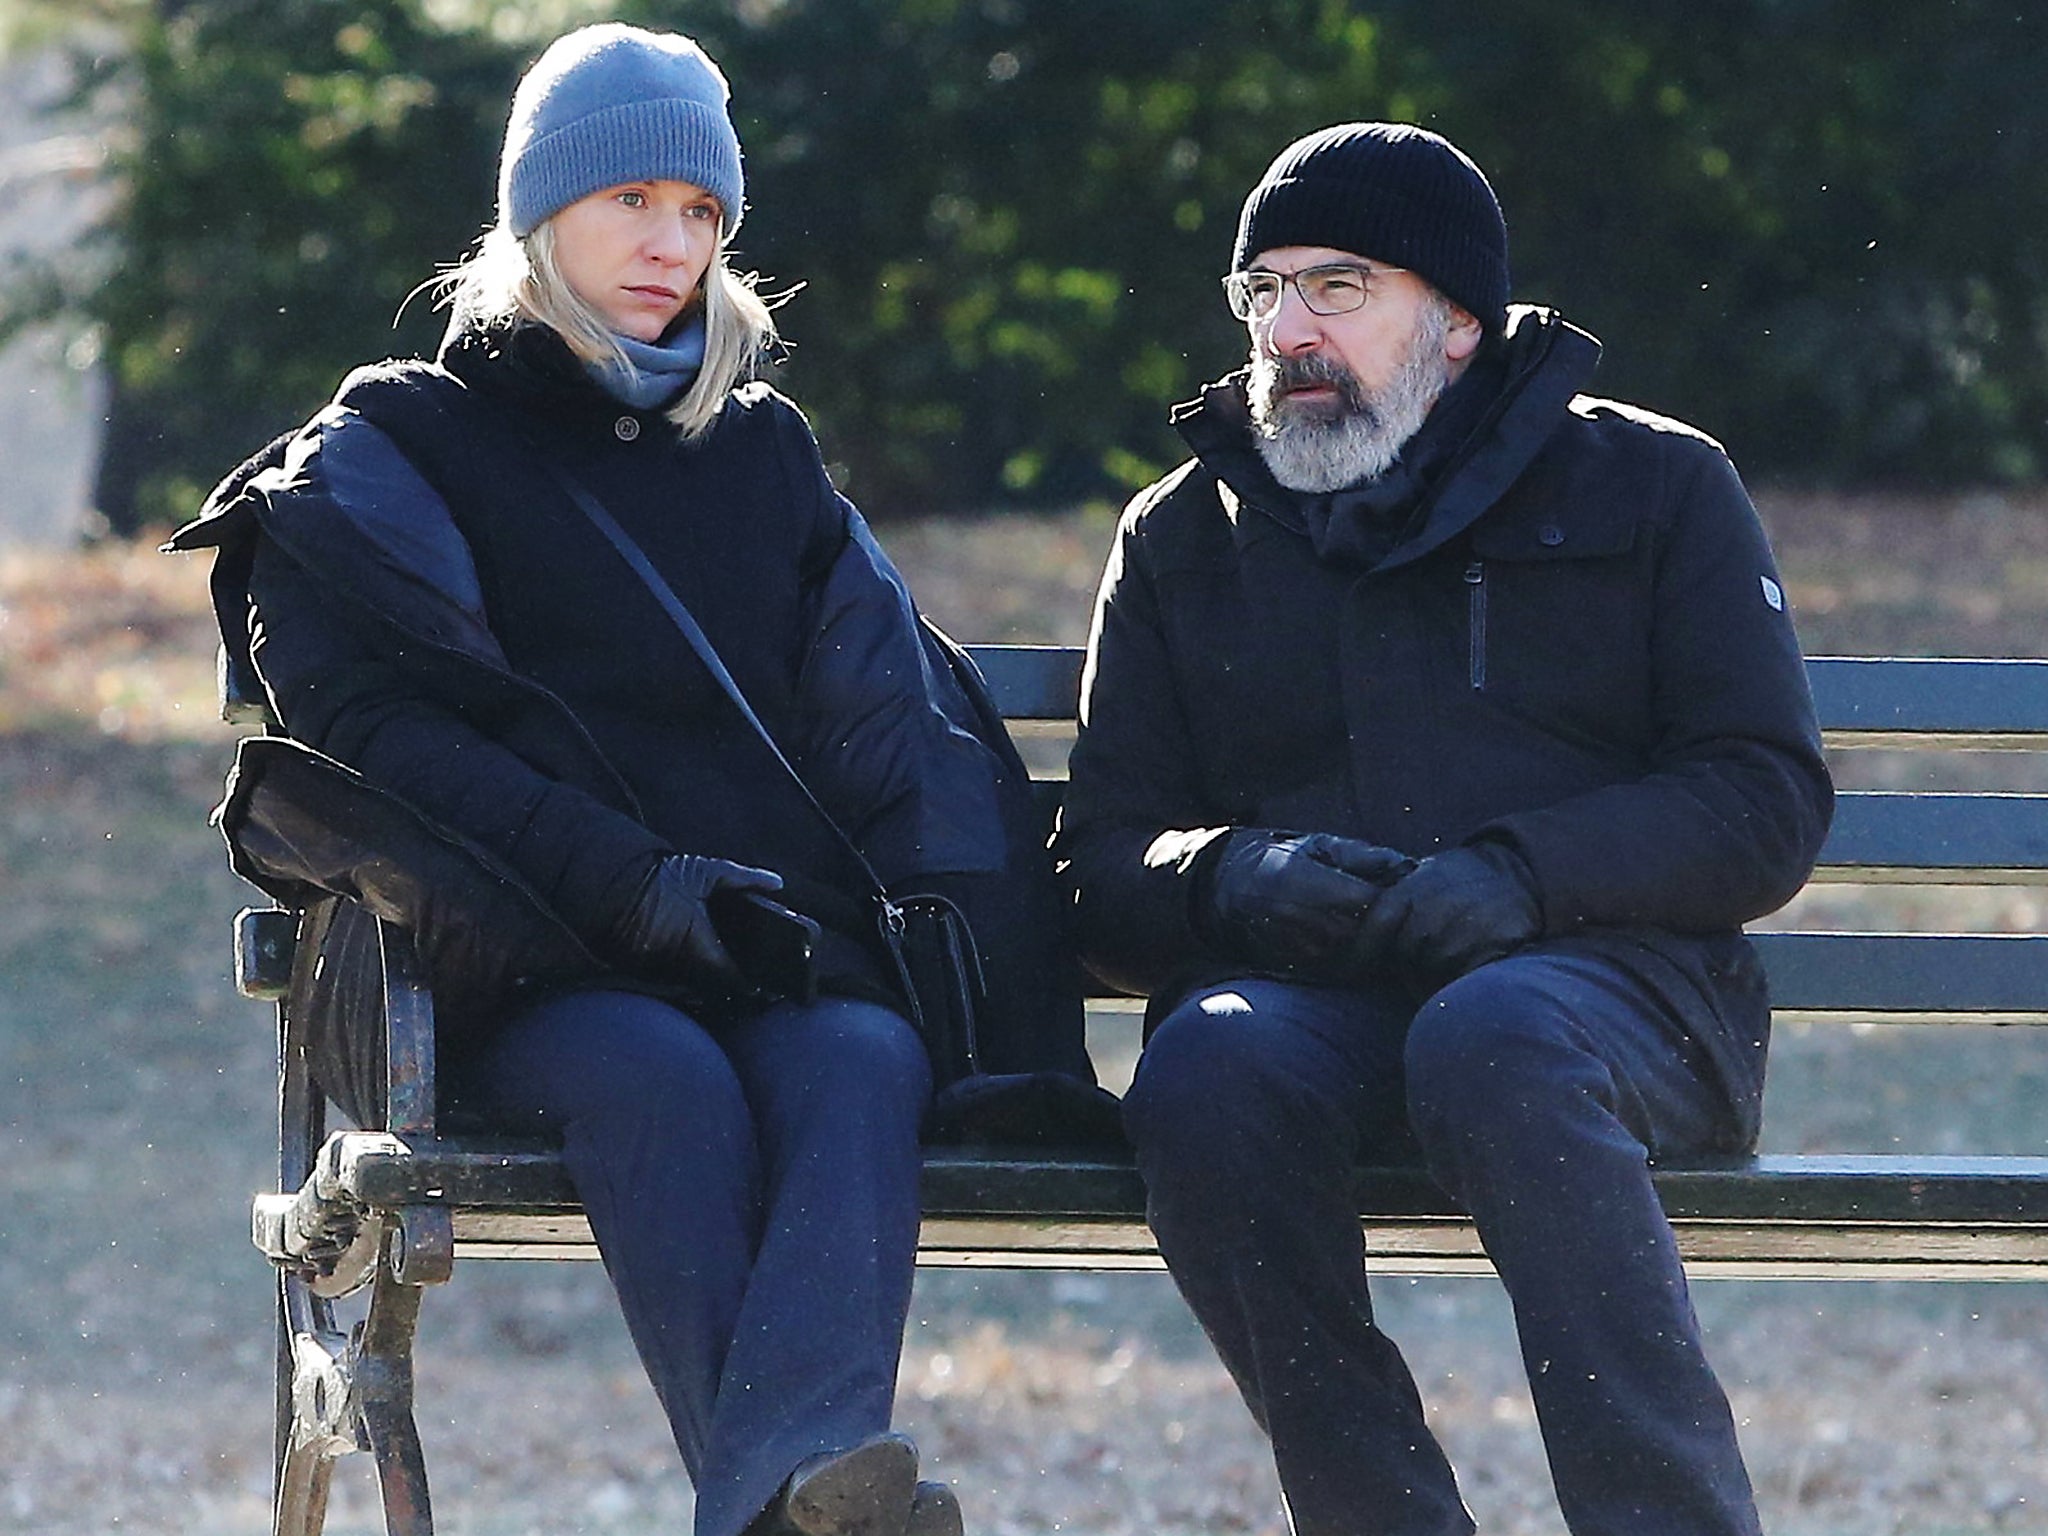 Claire Danes and Mandy Patinkin on set filming an episode of 'Homeland'